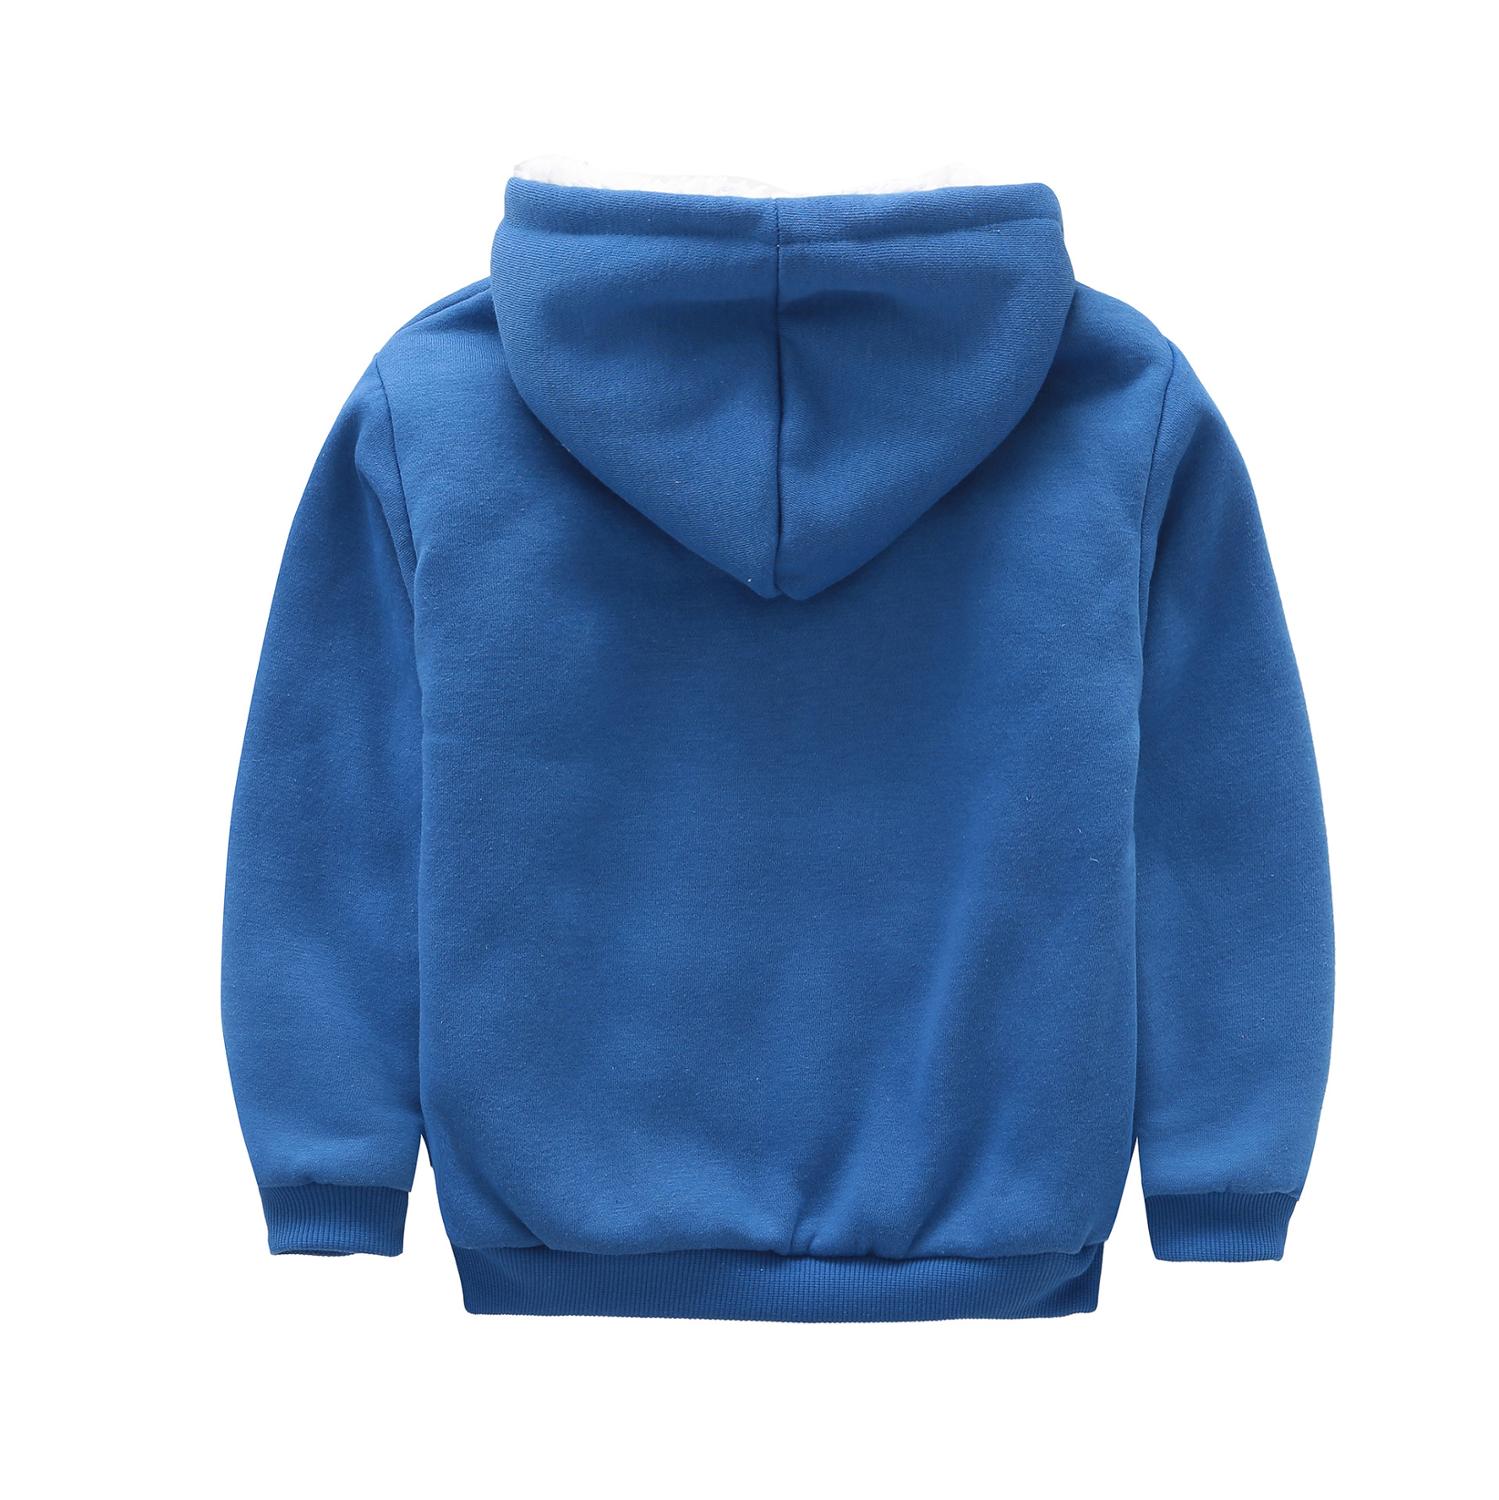 Children Clothes Boys Jackets Pure color Hooded Wool pullover upset ...